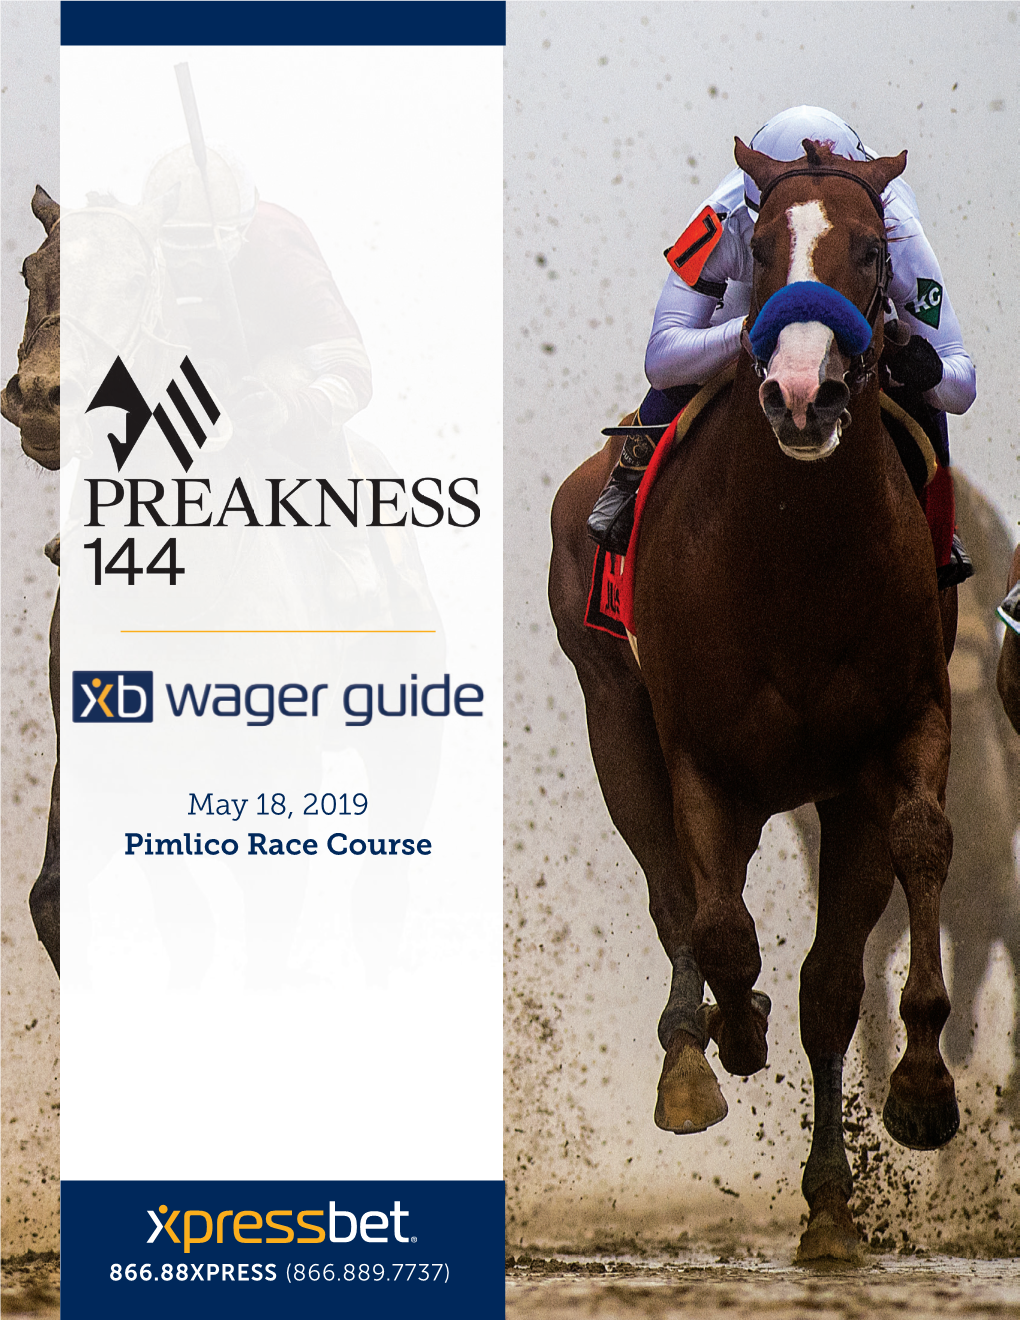 May 18, 2019 Pimlico Race Course